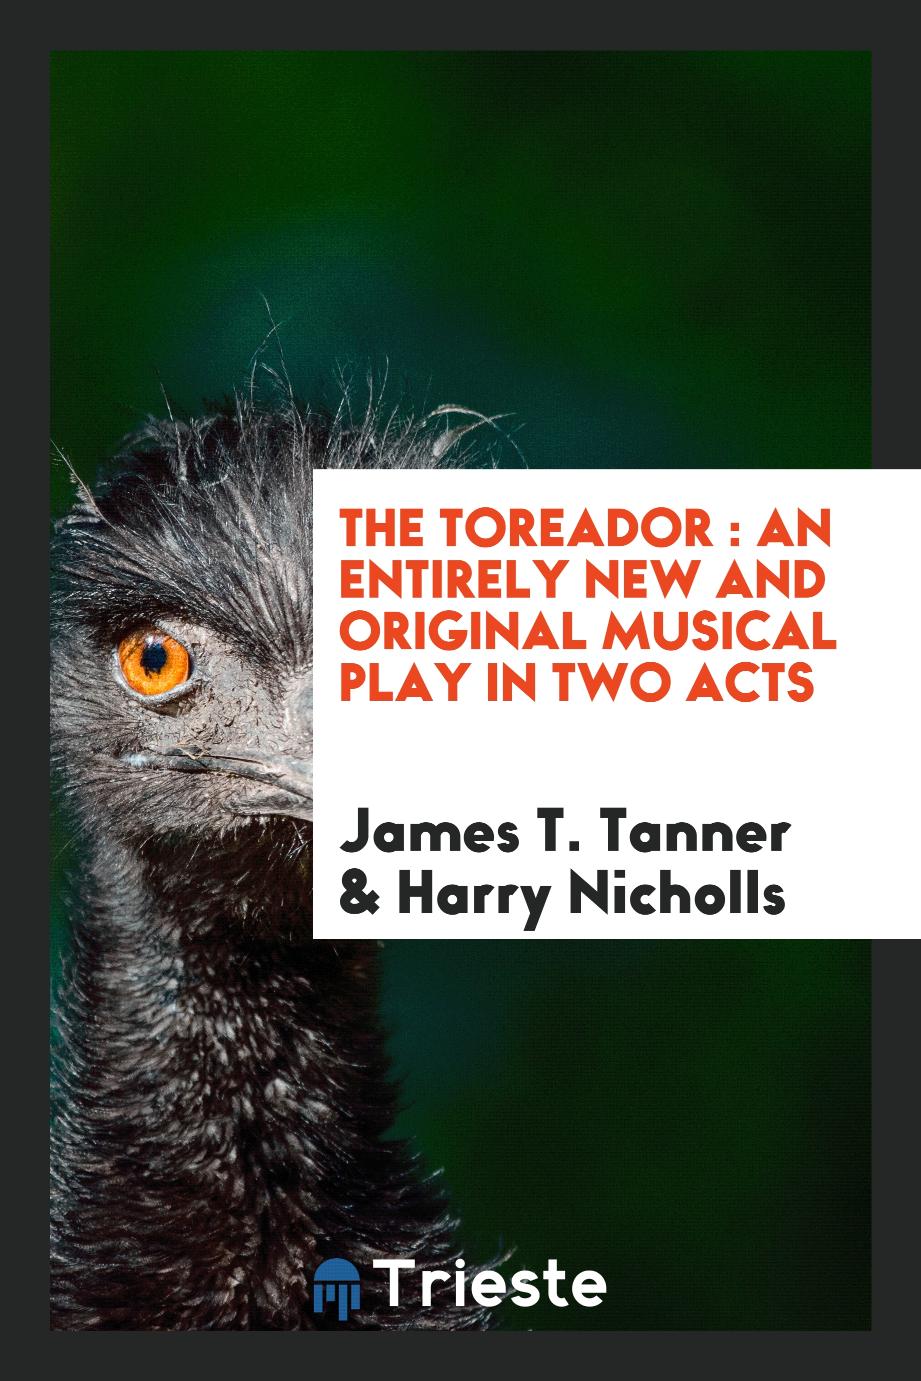 The toreador : an entirely new and original musical play in two acts